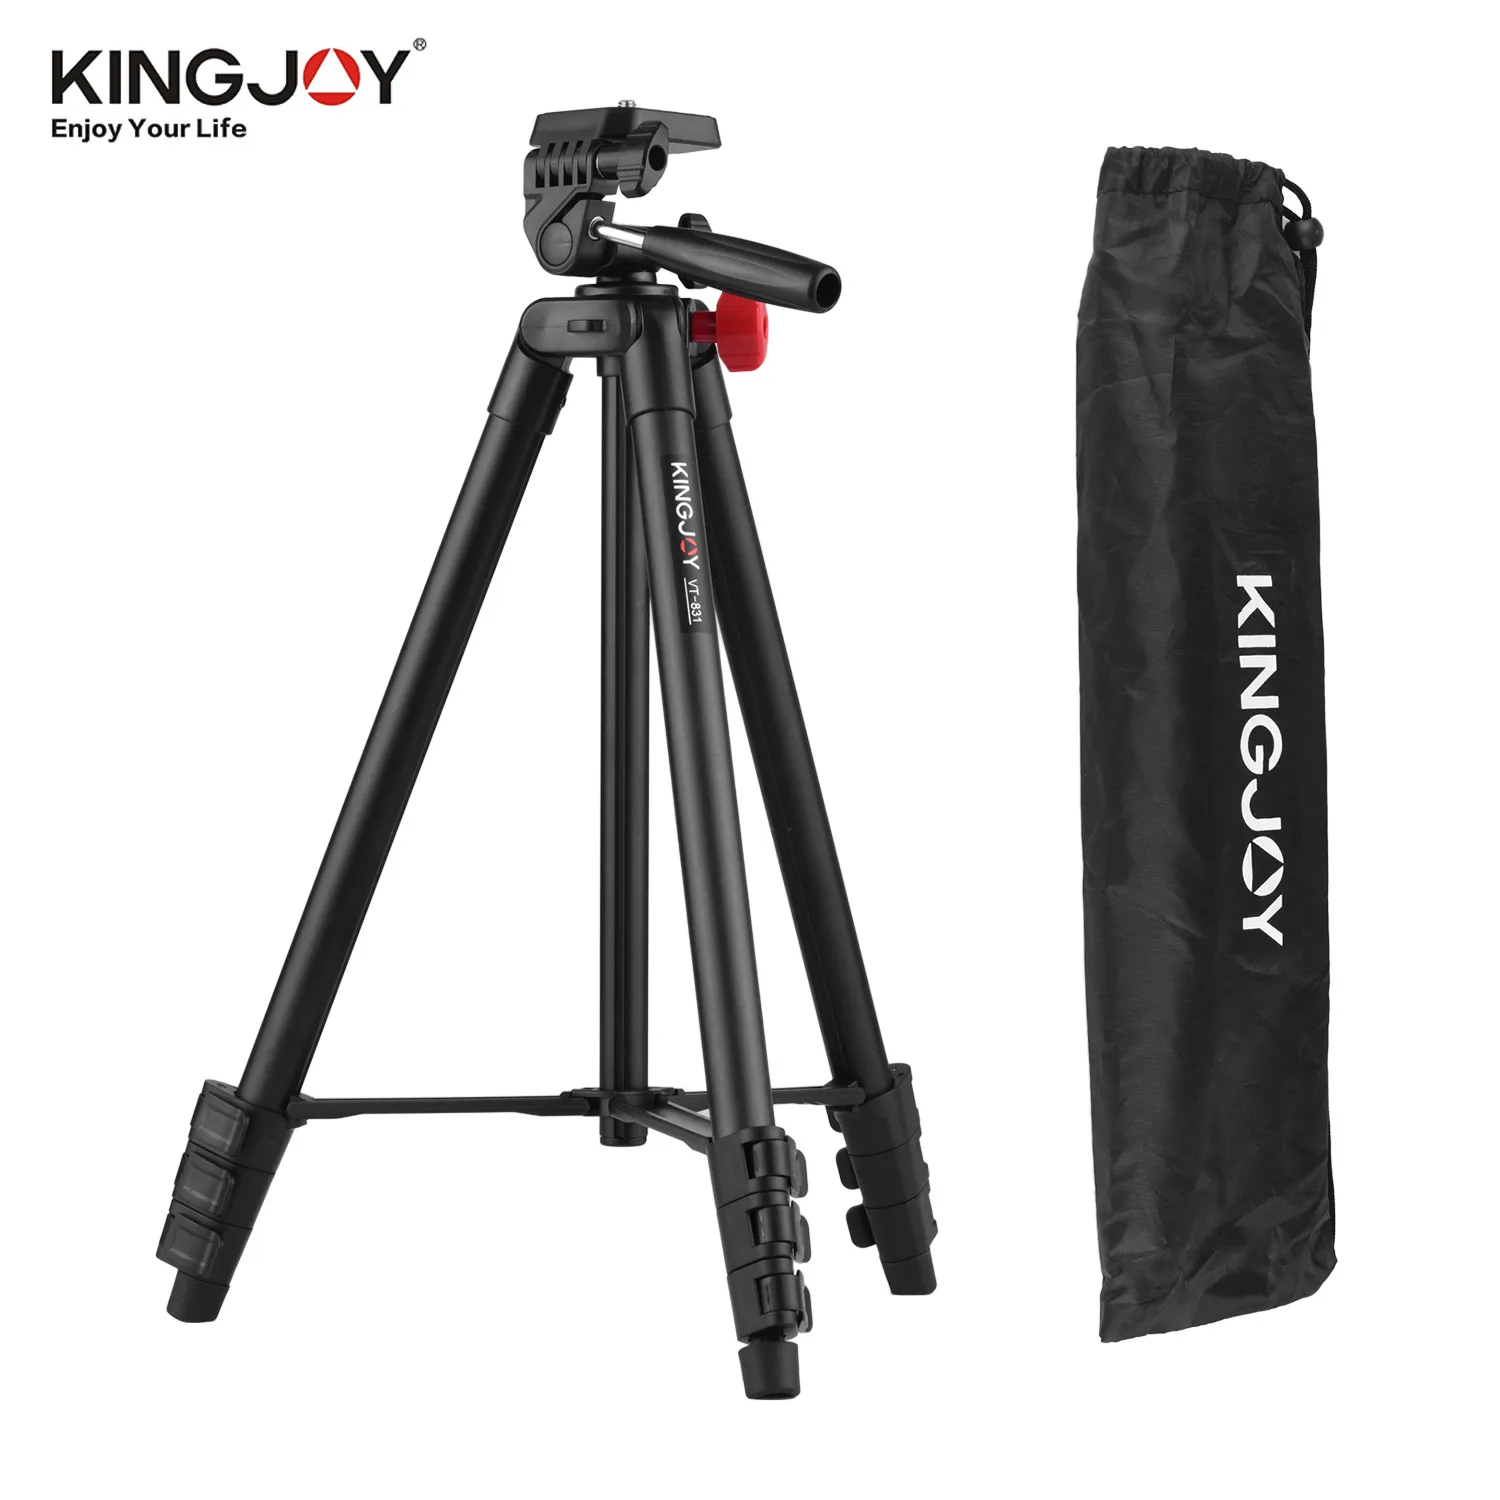 

KINGJOY Lightweight Tripods Portable Travel Camera PhotoTripod Video Cameras Stand Monopod Accessories Stand for SLR DSLR